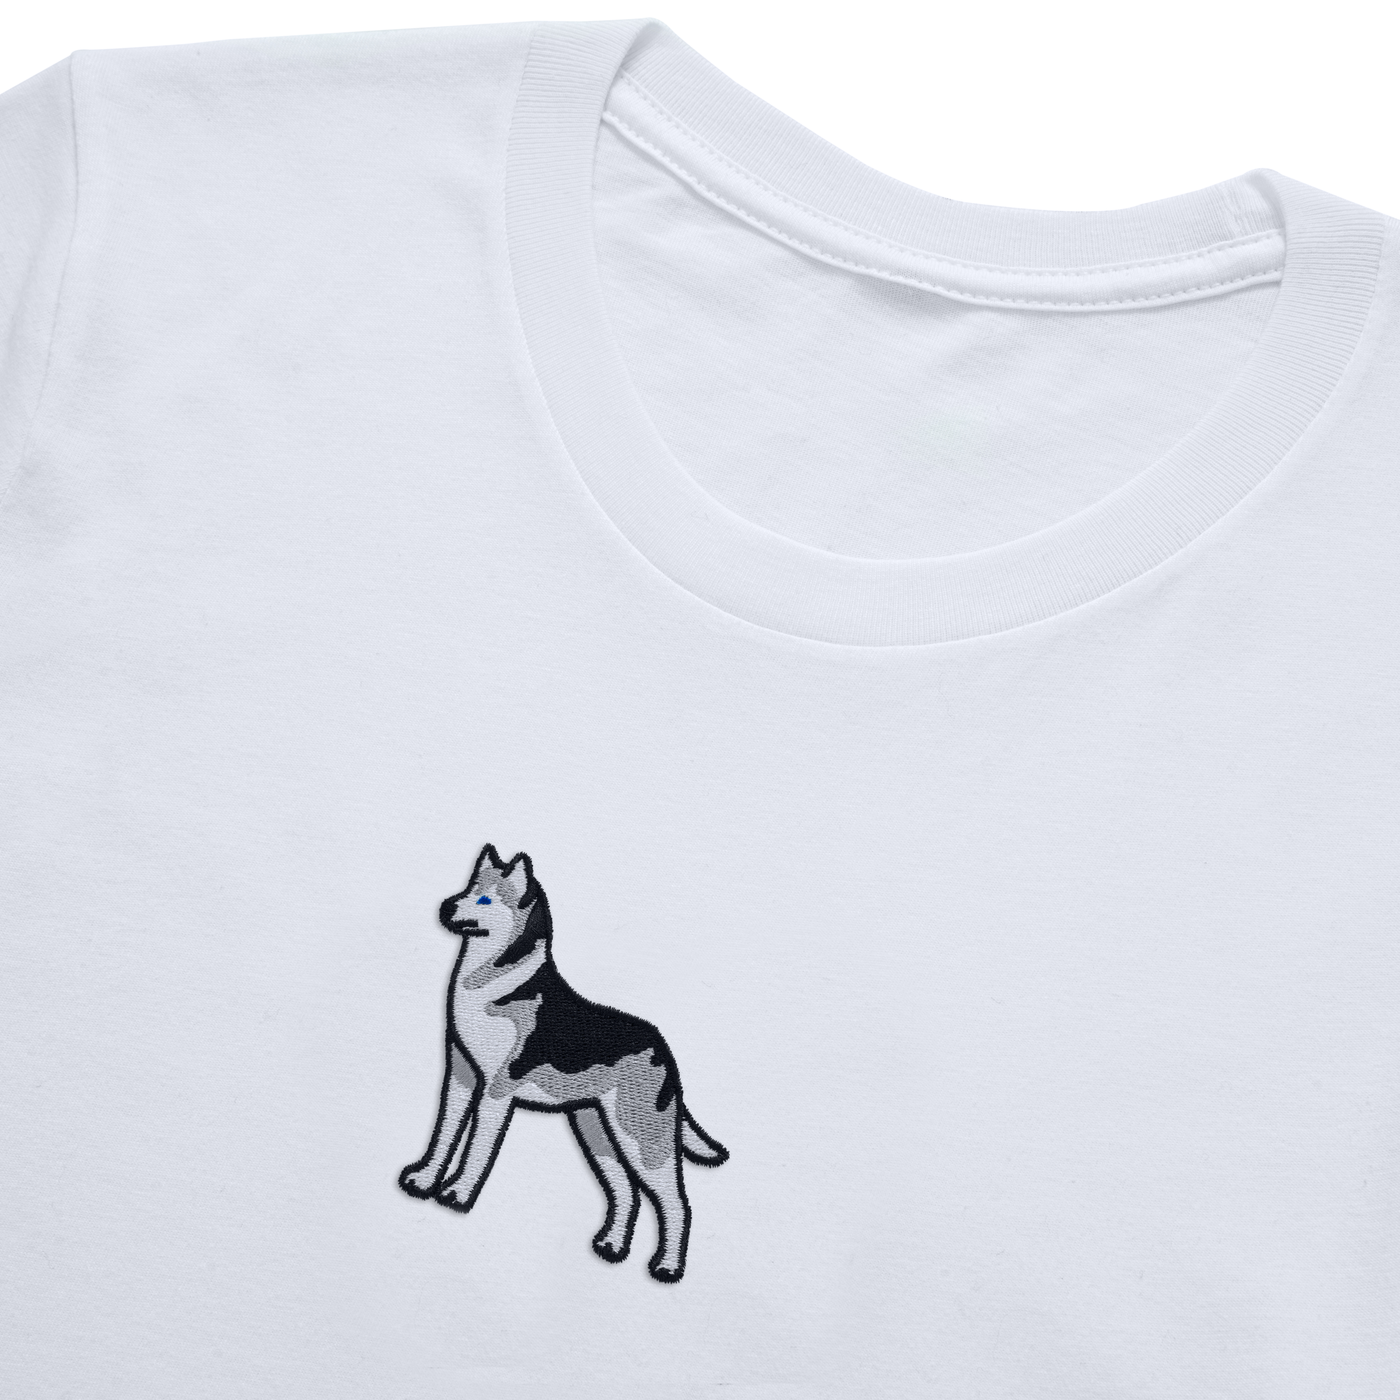 Bobby's Planet Kids Embroidered Siberian Husky T-Shirt from Paws Dog Cat Animals Collection in White Color#color_white